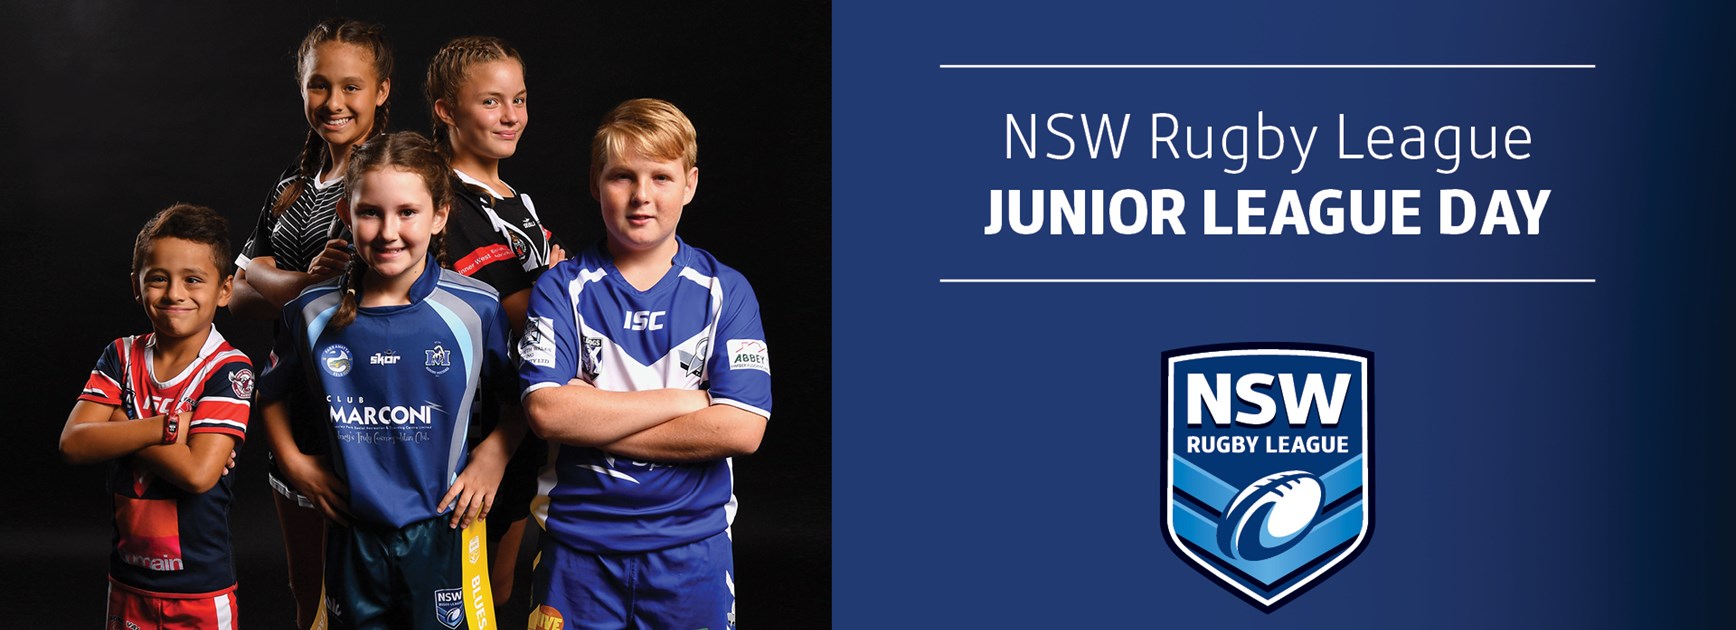 Join the fun at the NSWRL Junior League Activation Day!